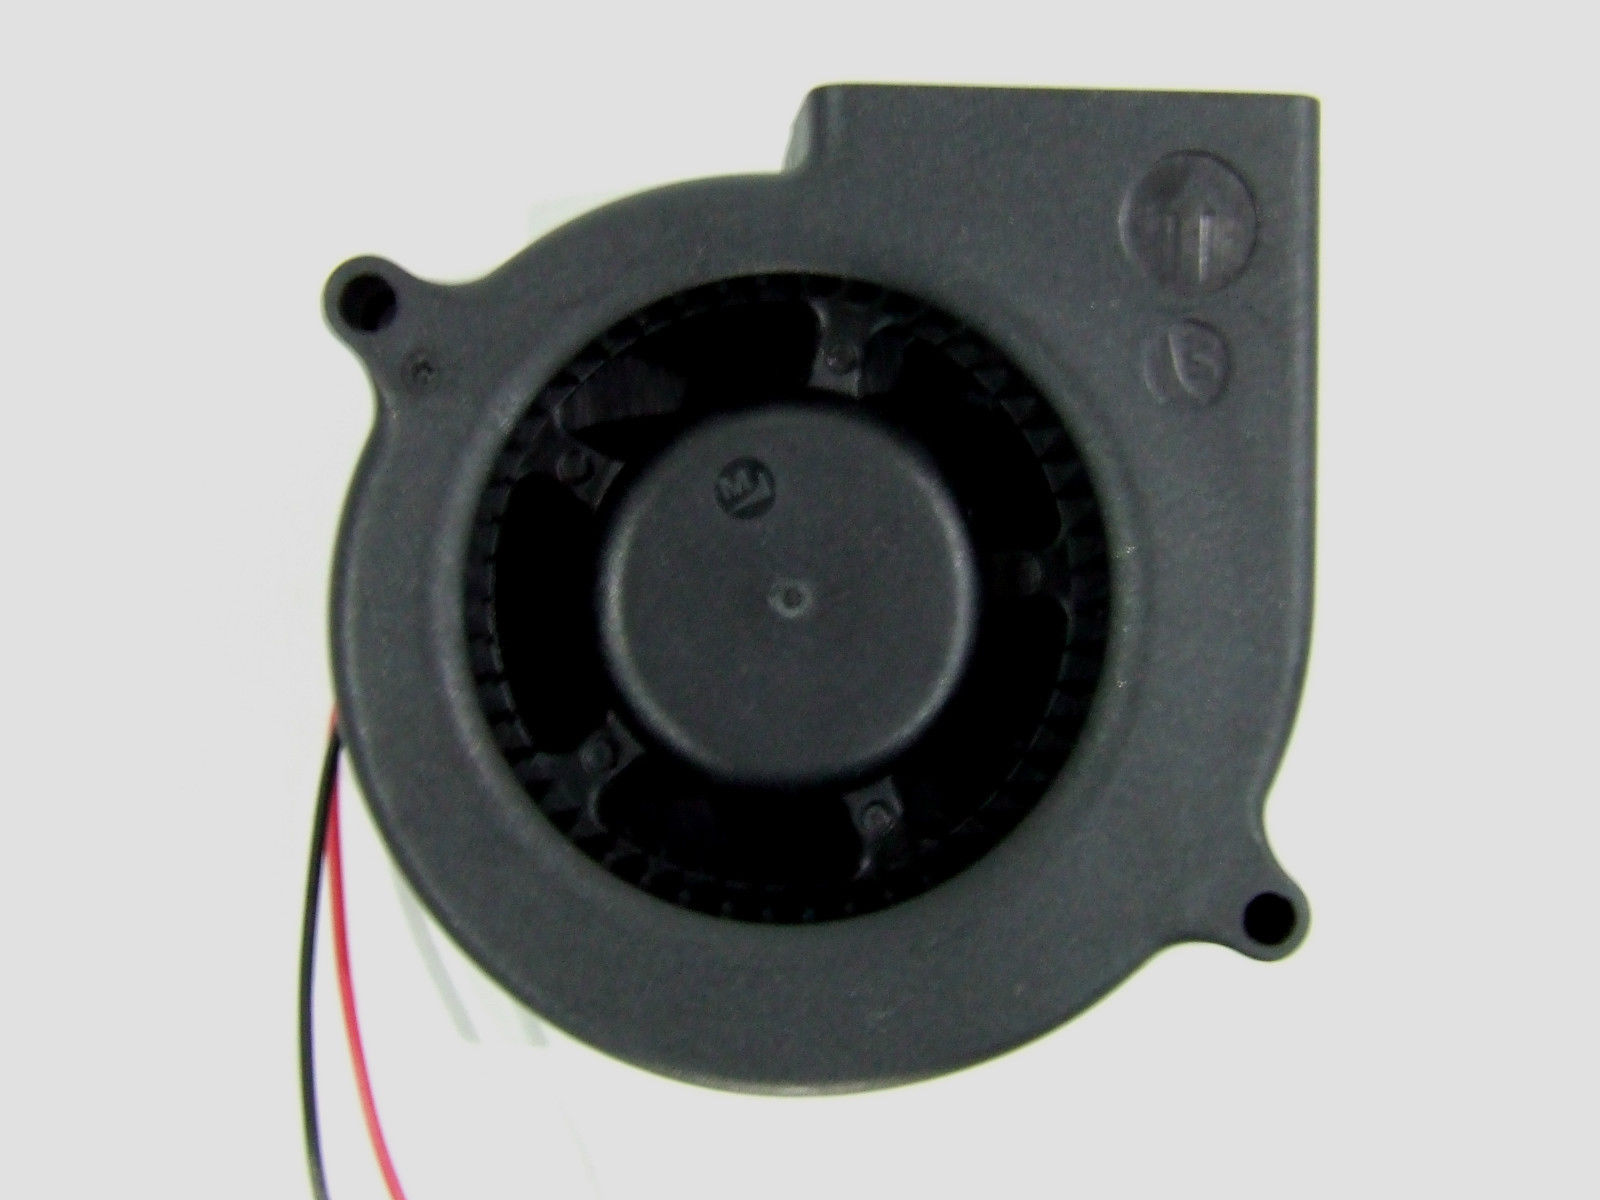 FAN WITH TANGENTIAL PUSH RESIN 12 VOLTS 0.50 A